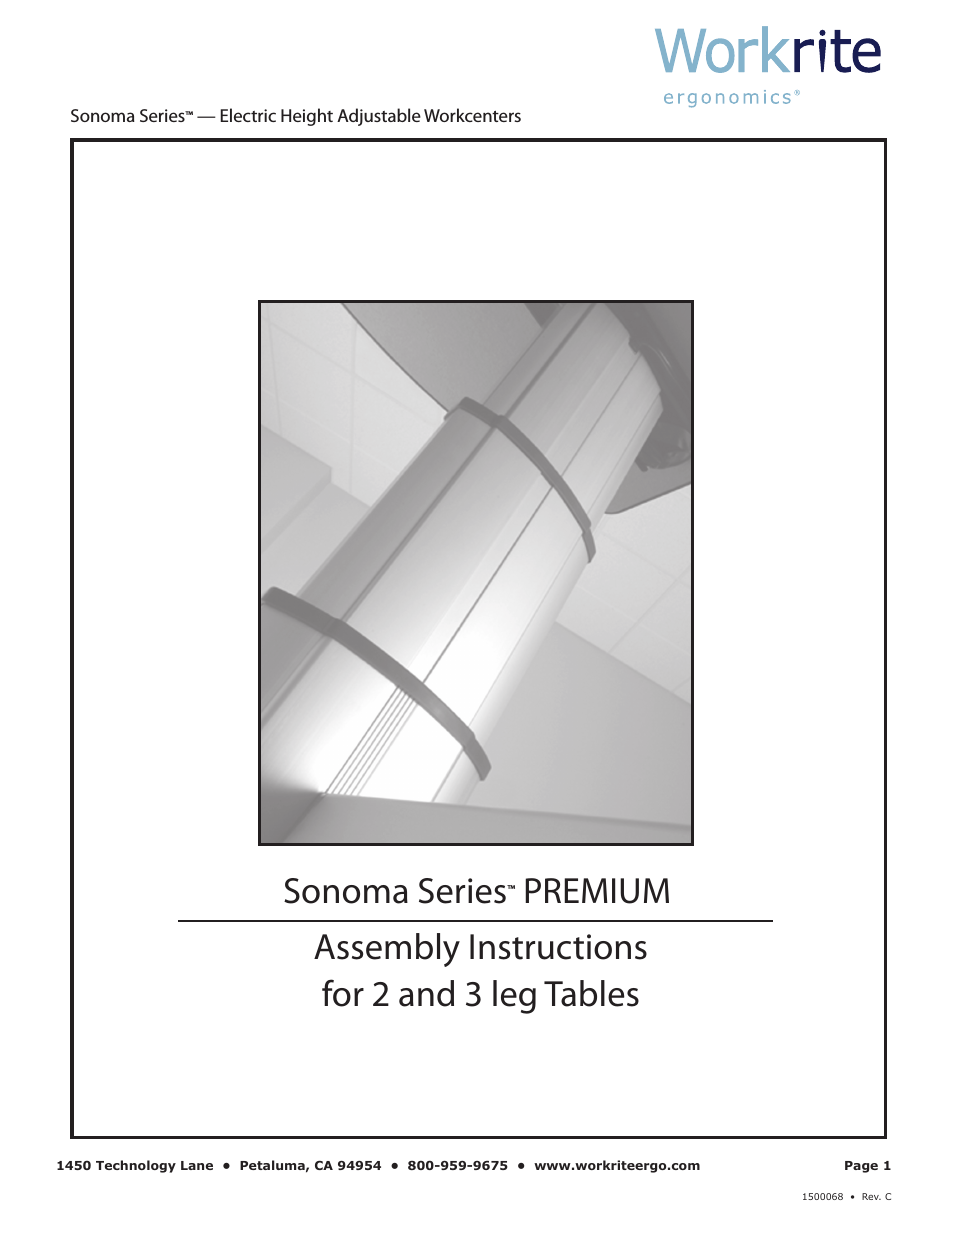 Sonoma Series PREMIUM Assembly Instructions